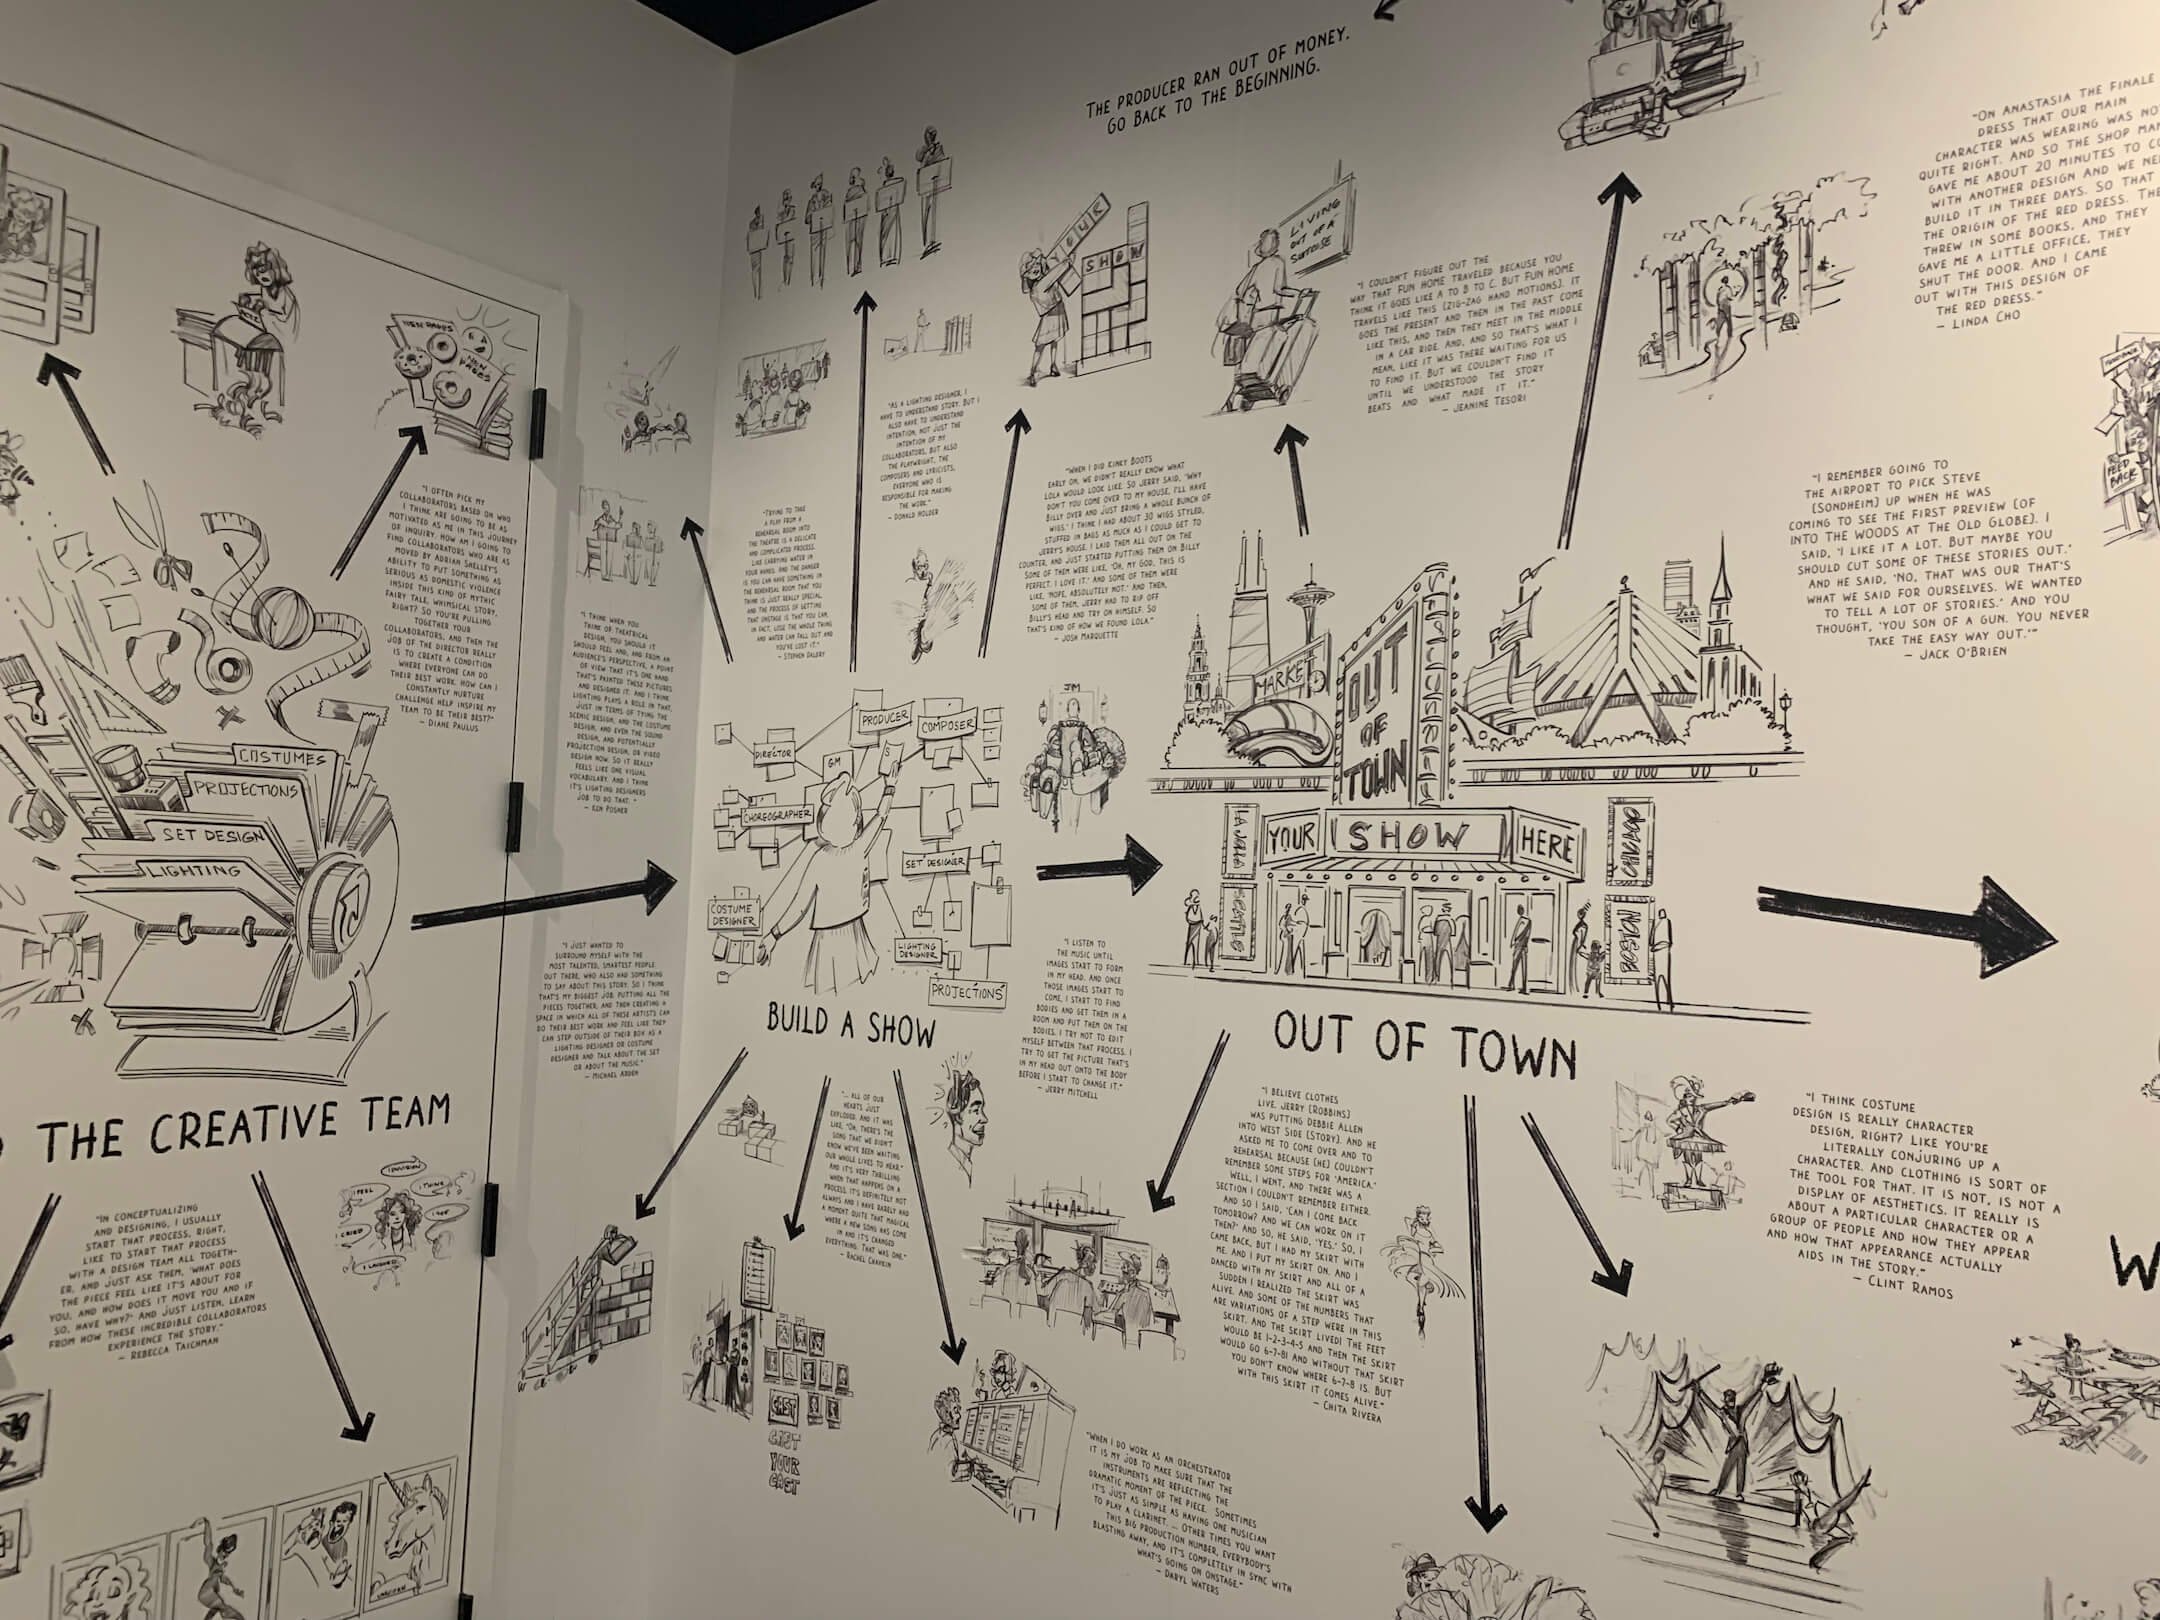  A graphic of the life cycle of a Broadway show covers the walls (Part 2) 